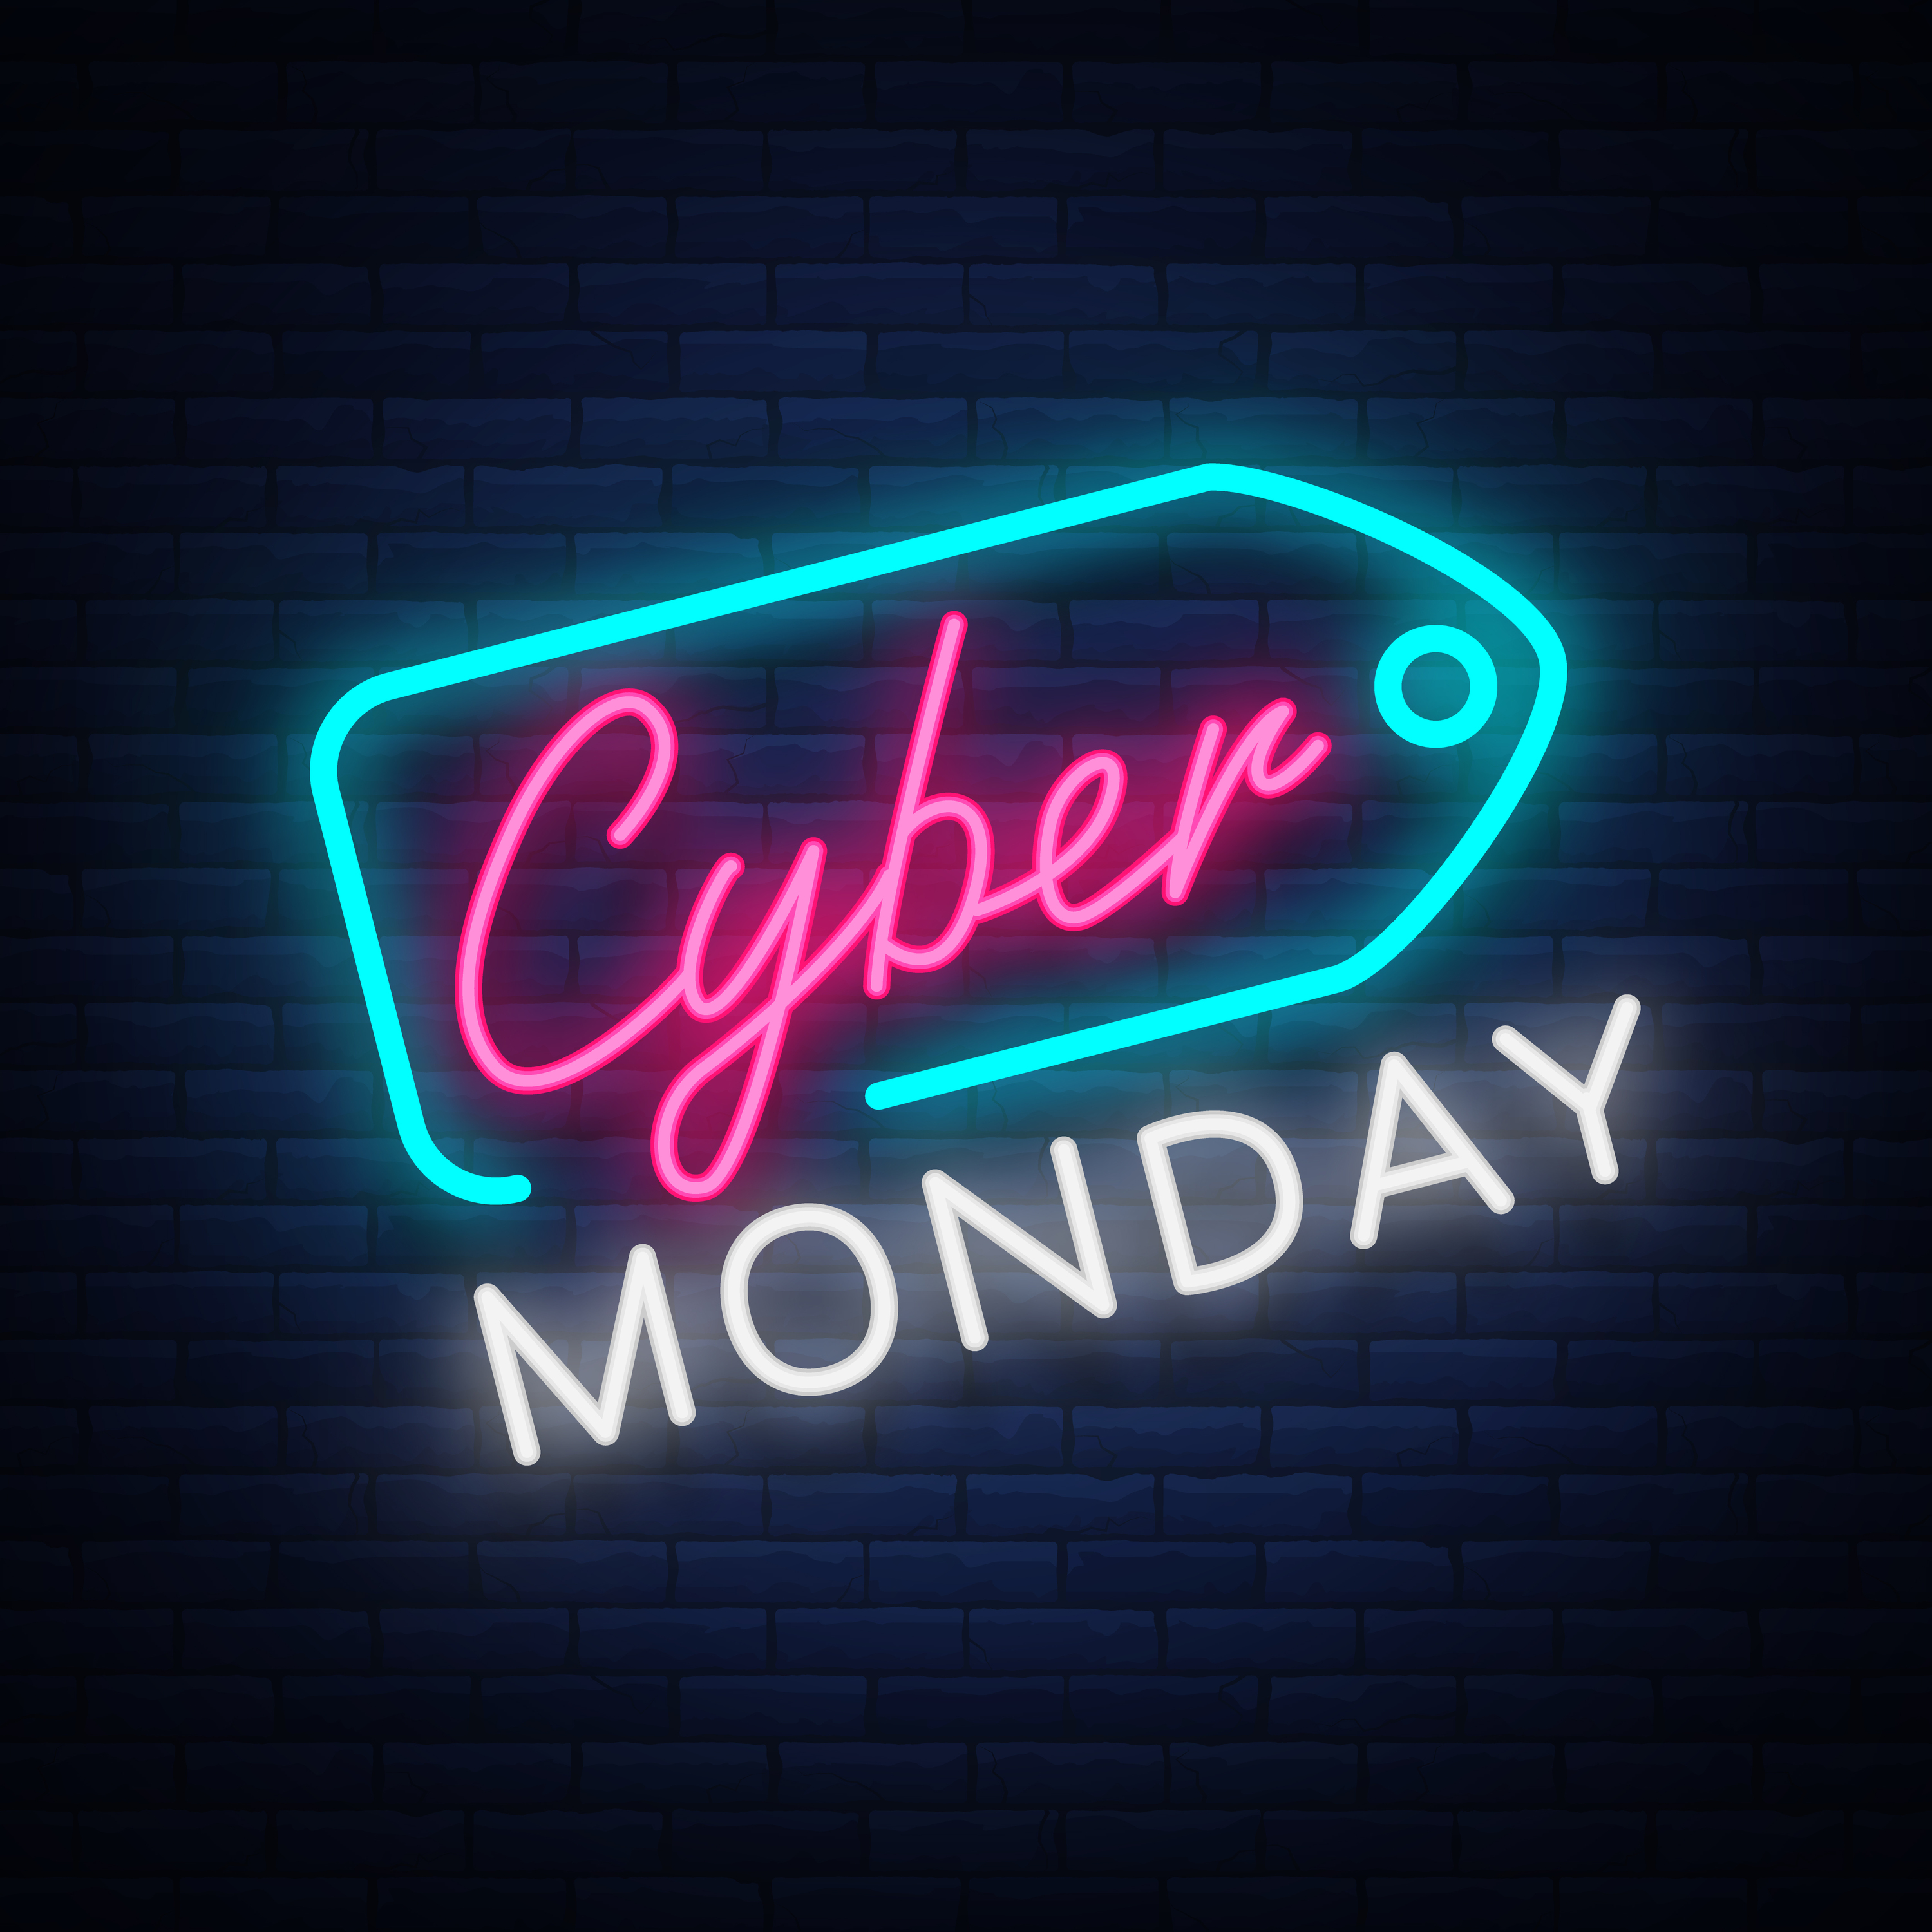 Every Amazon Cyber Monday Deal!